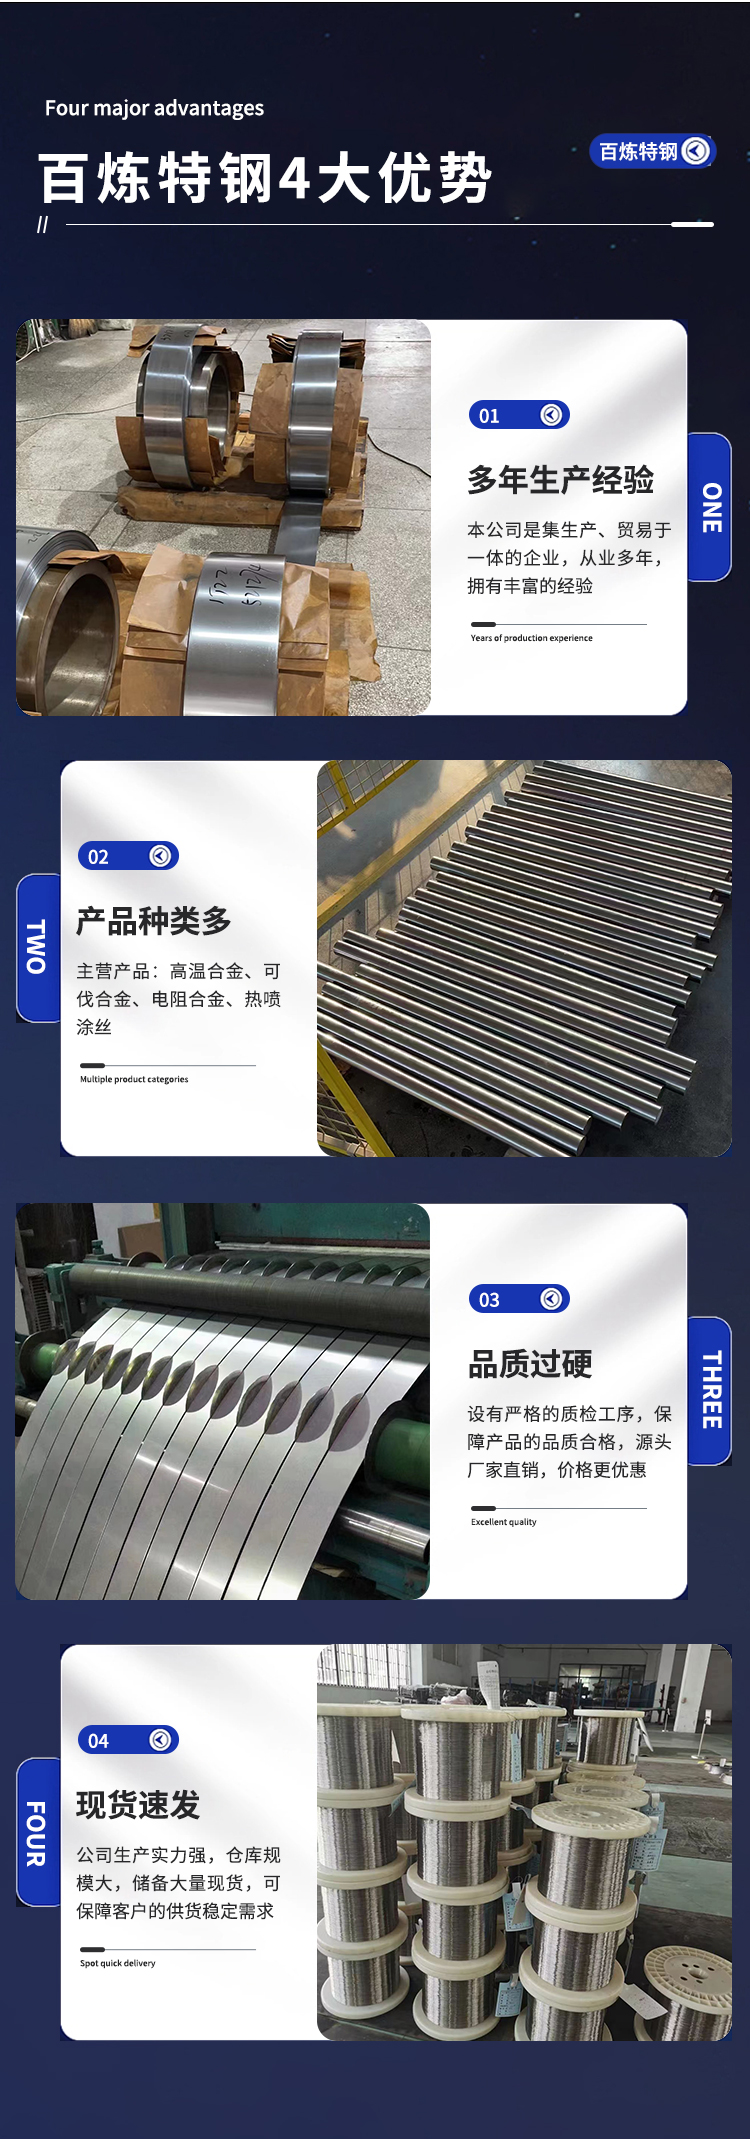 Bailian Special Steel Nickel Cobalt Alloy 4J29 Strip, Bar, Plate, and Pipe Can be Customized